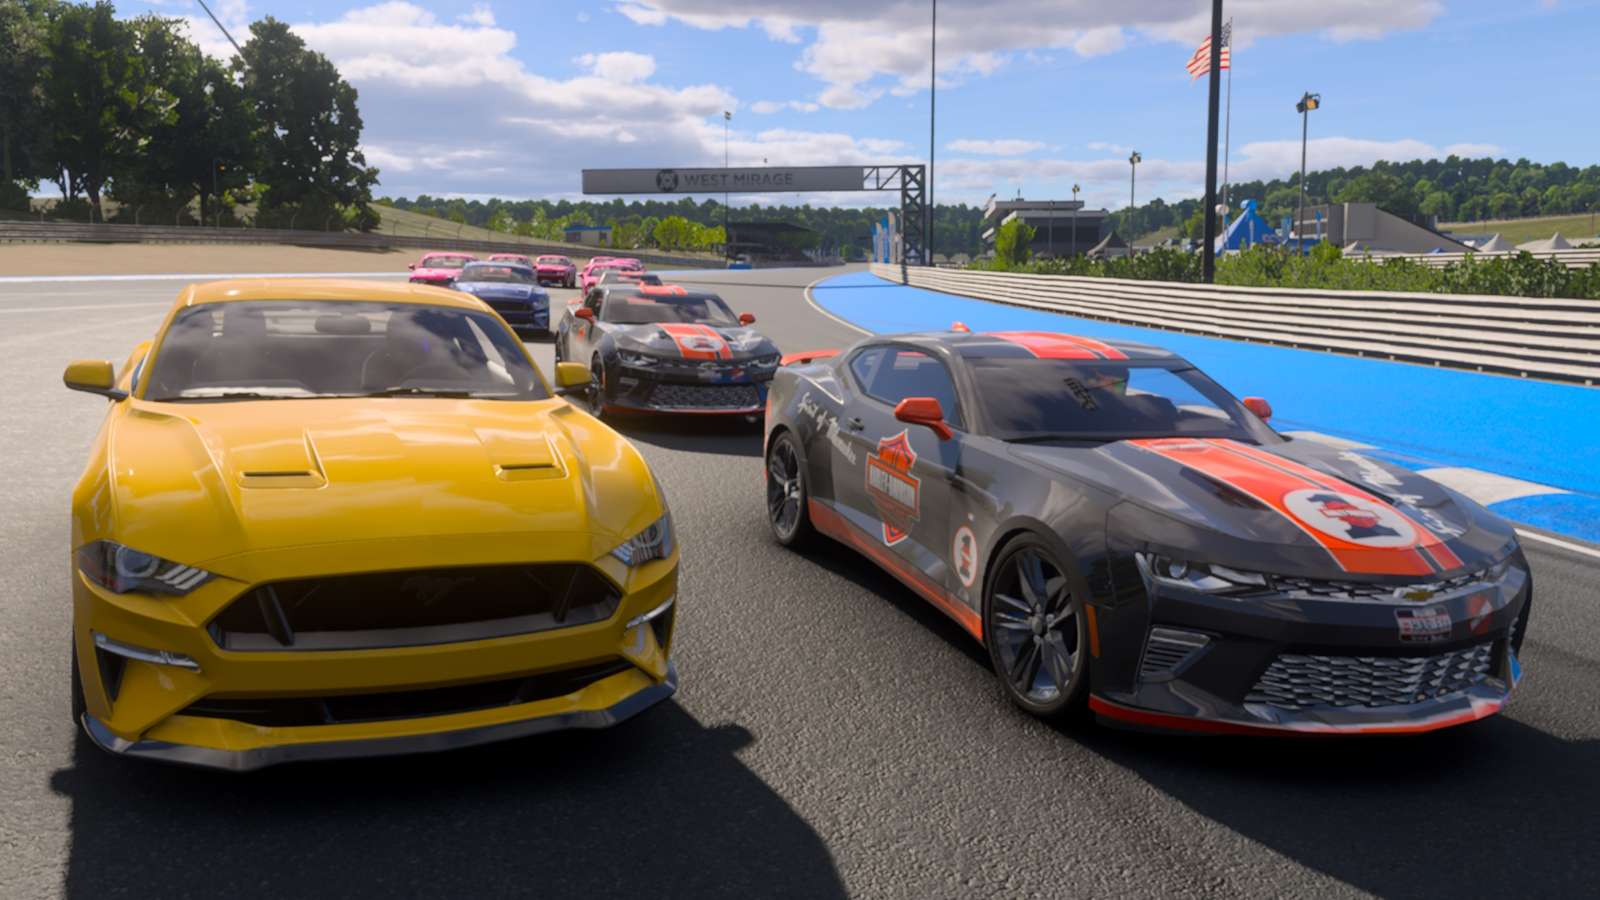 Builders Cup Modern Muscle tour in Forza Motorsport.